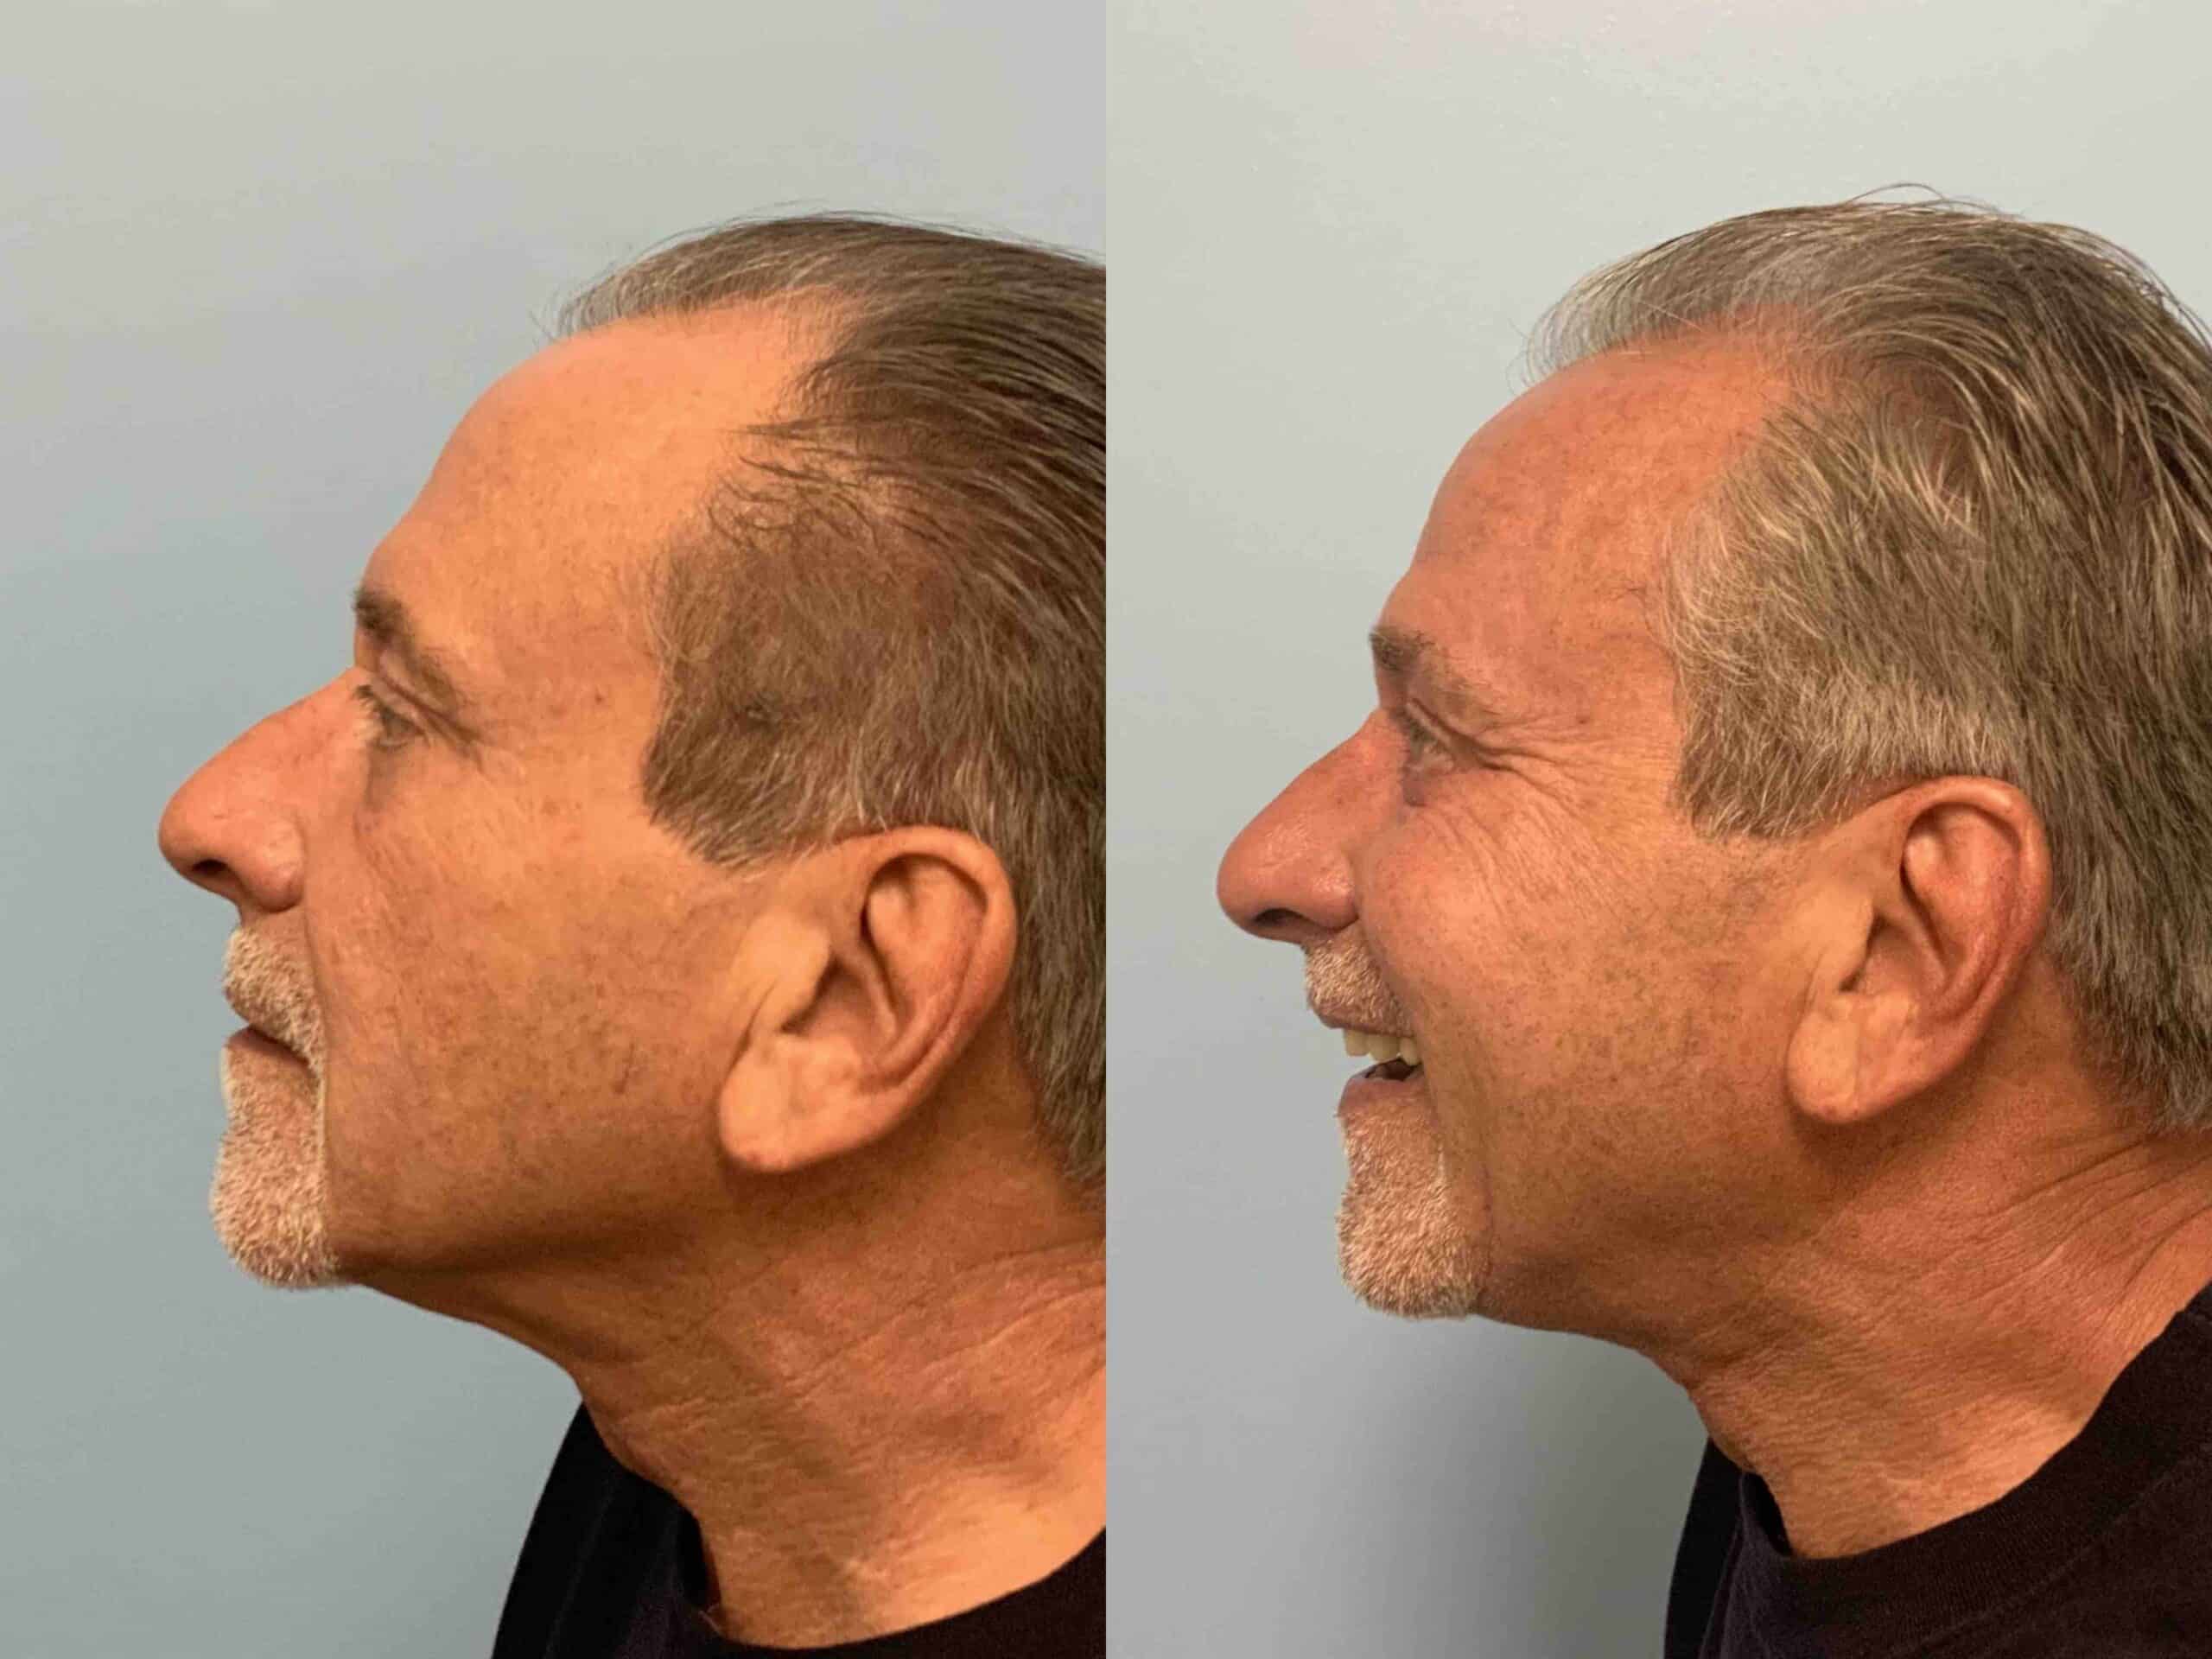 Before and after, 11 months post op from Lower Lid Blepharoplasty/Canthopexy, Sculptra Injectable, performed by Dr. Paul Vanek (side view)